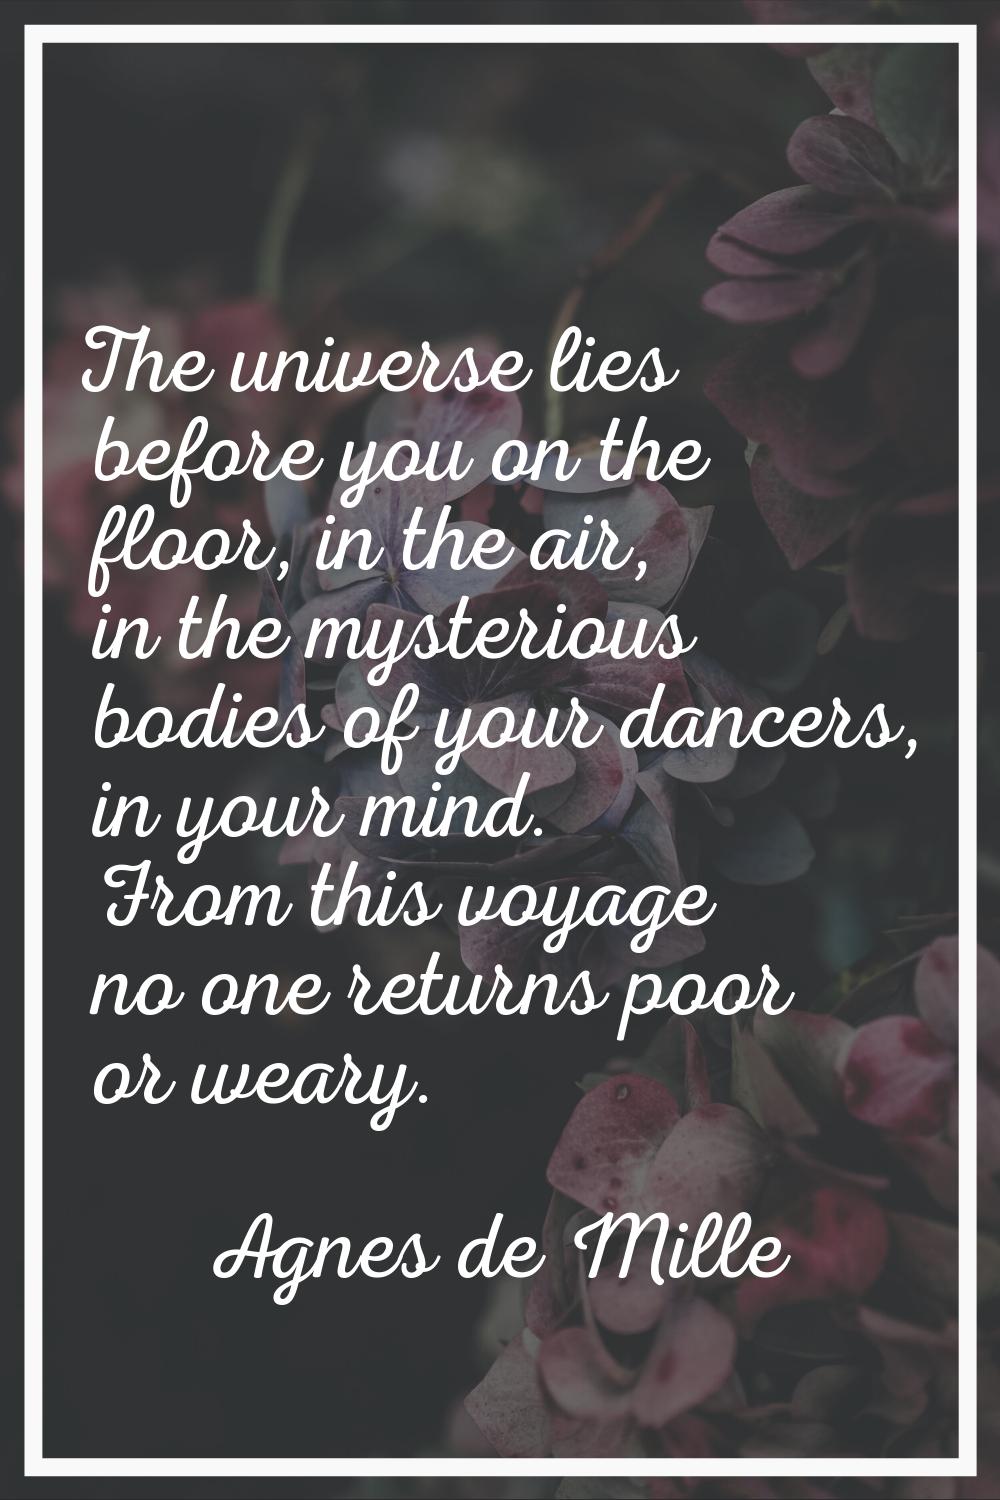 The universe lies before you on the floor, in the air, in the mysterious bodies of your dancers, in